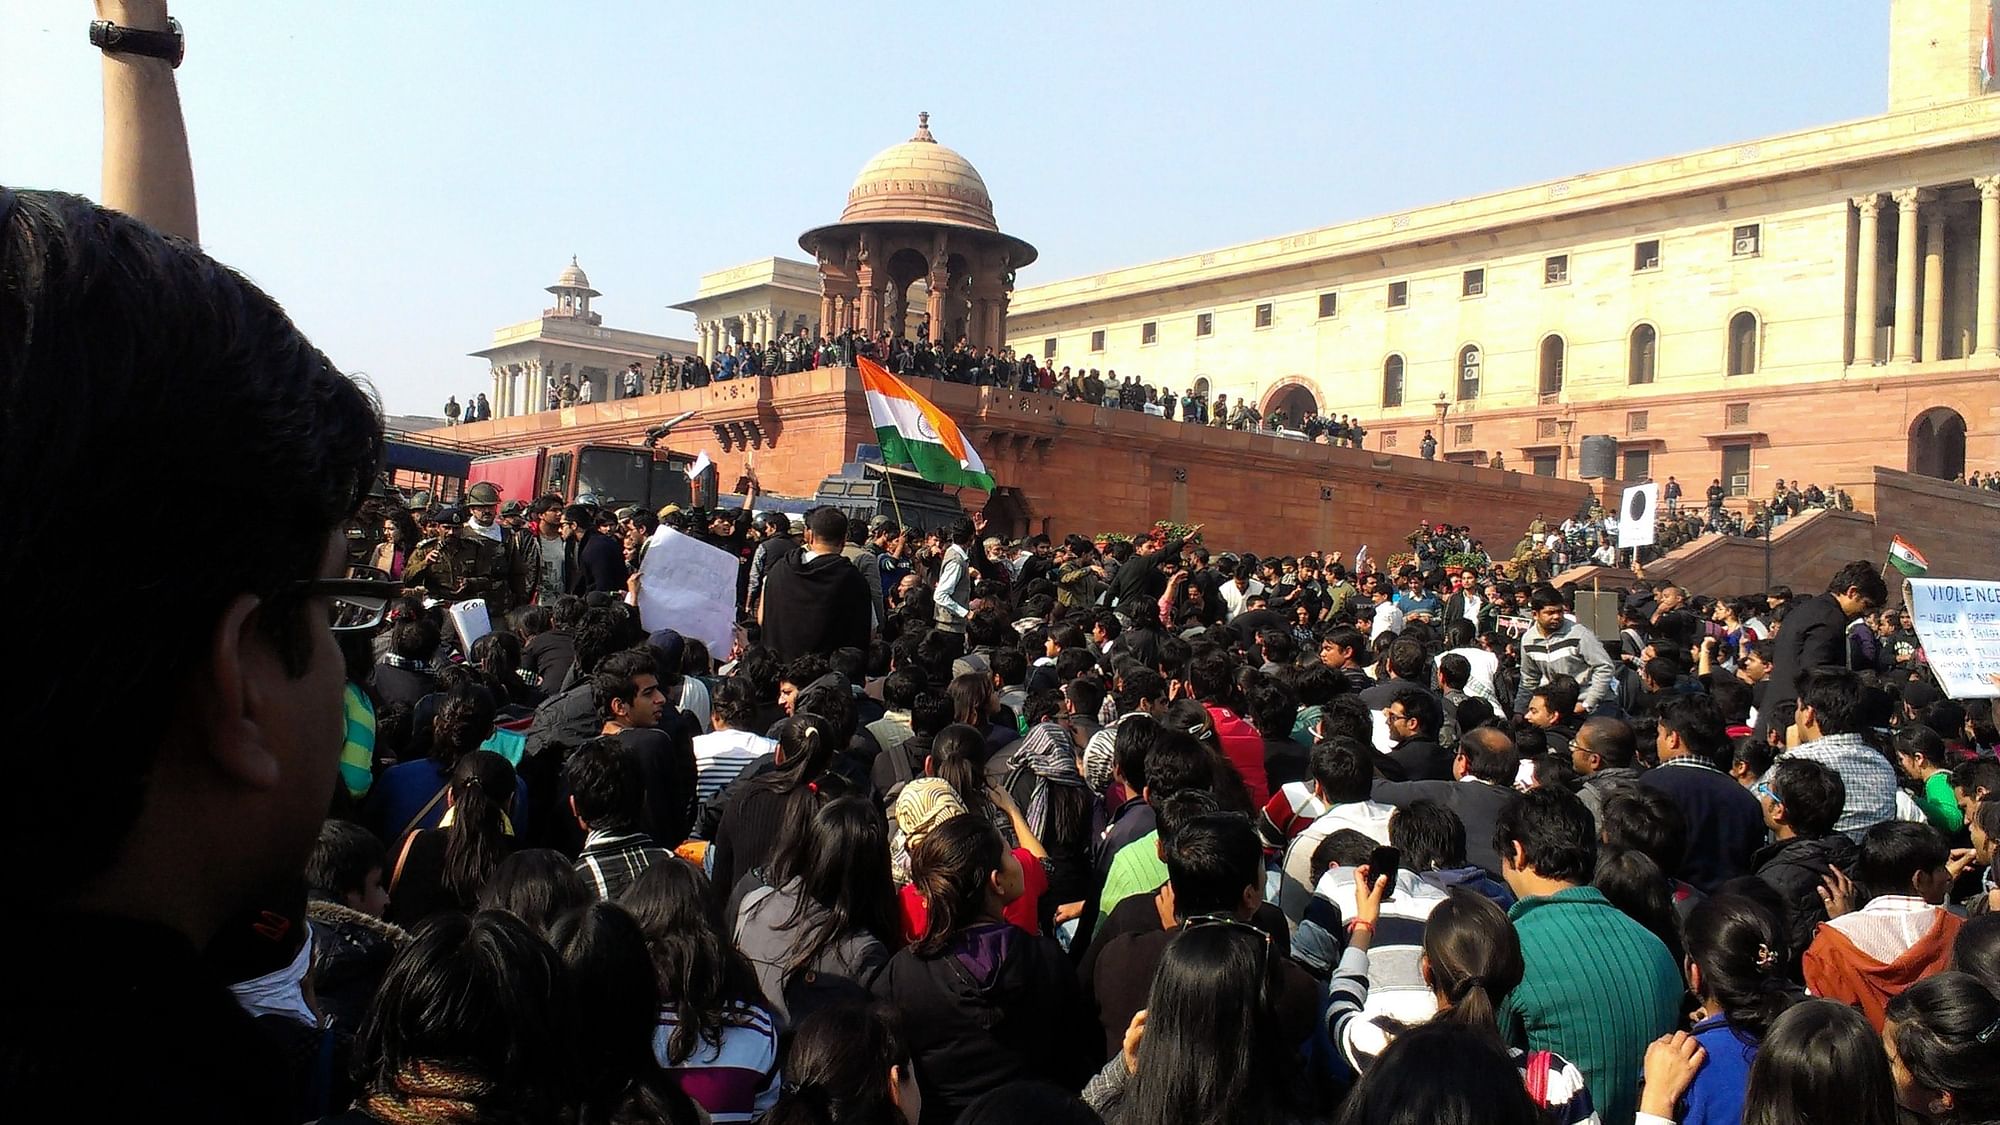 <div class="paragraphs"><p>As we near the 10-year anniversary of the <a href="https://www.youtube.com/watch?v=YI_eTyLsJvA">historic 'Nirbhaya' protests</a>, here's a glimpse of the December 2012 demonstrations.</p></div>